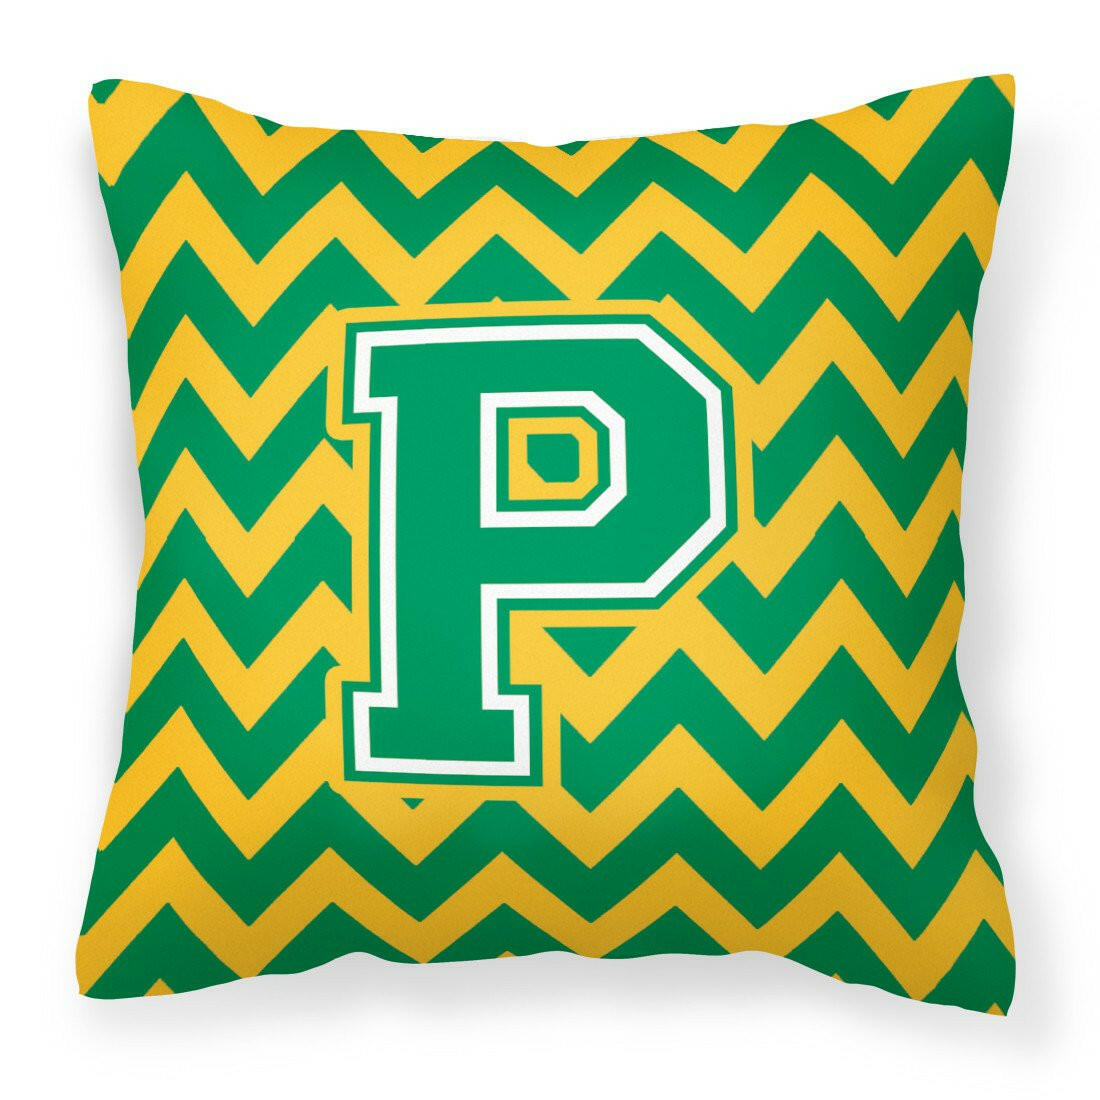 Letter P Chevron Green and Gold Fabric Decorative Pillow CJ1059-PPW1414 by Caroline's Treasures